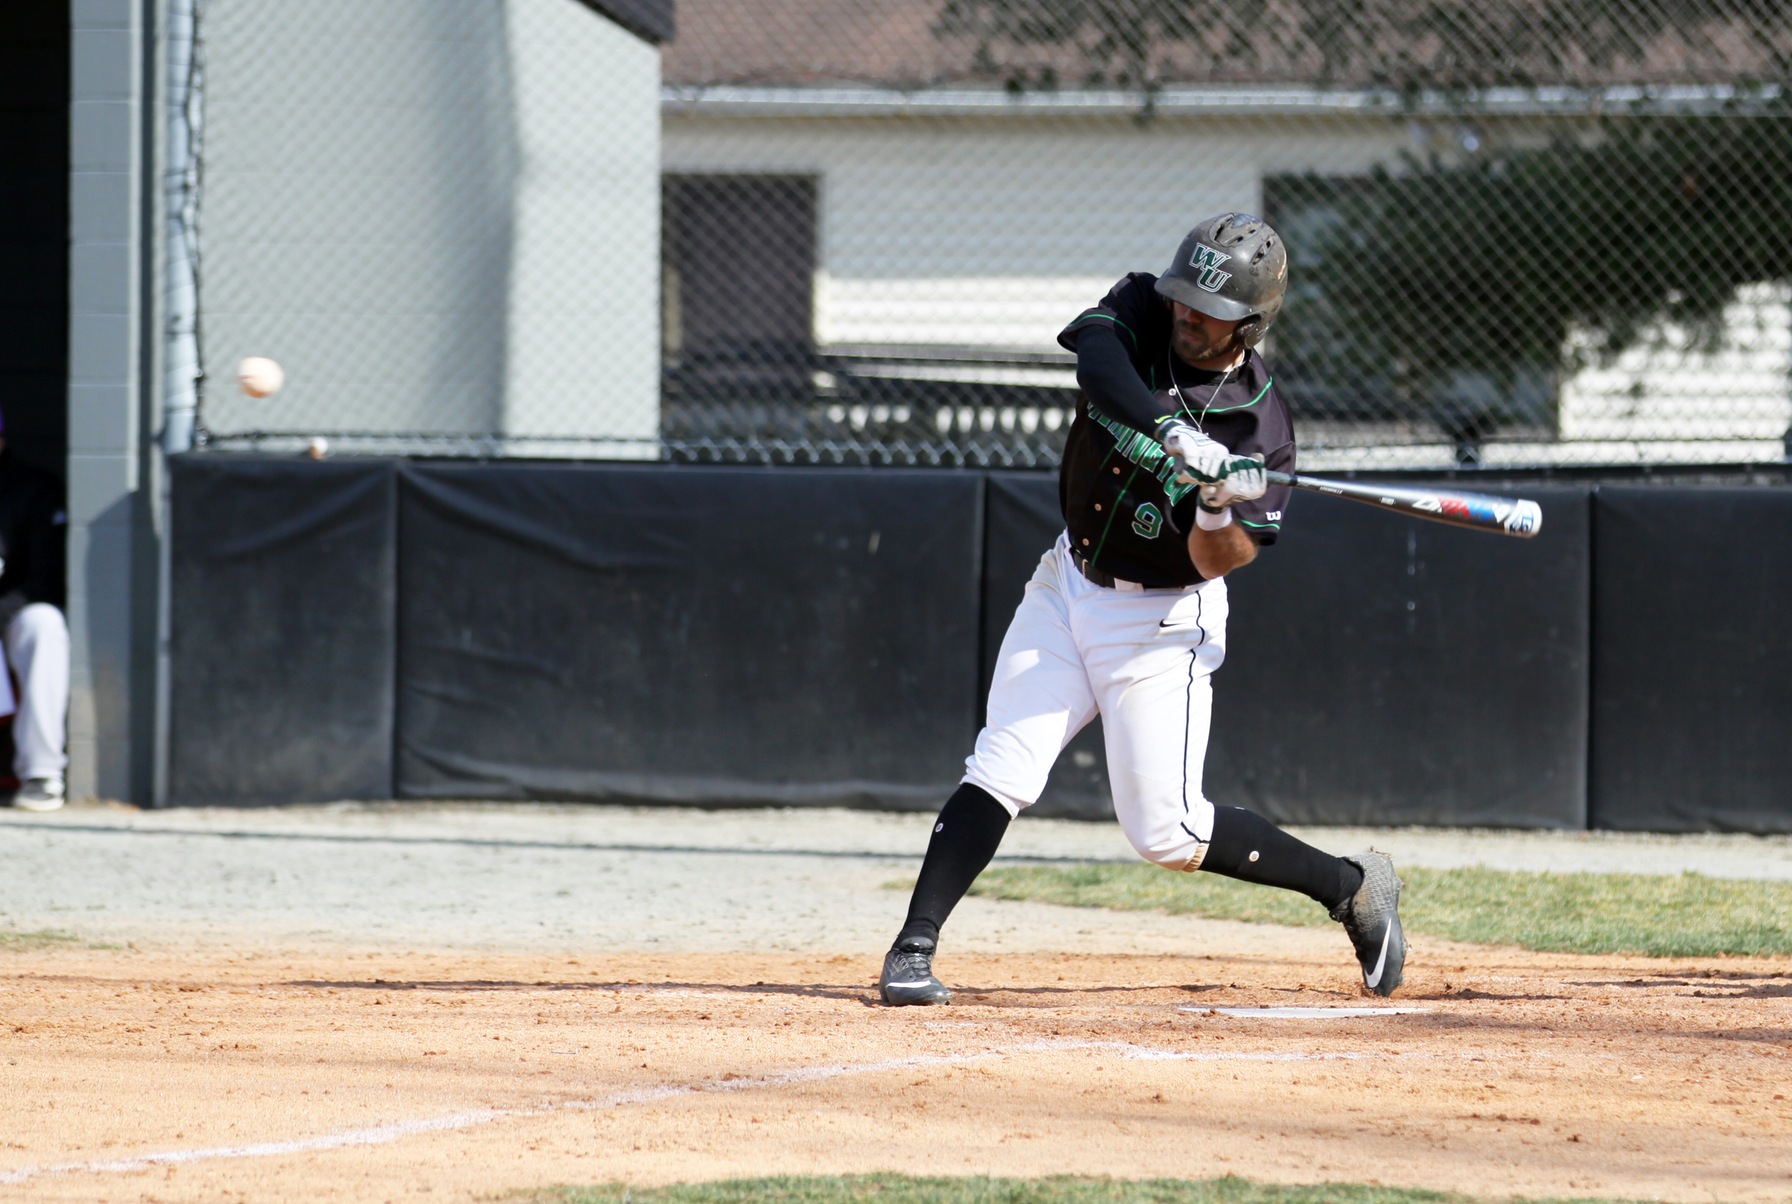 Copyright 2019; Wilmington University. All rights reserved. File photo of Juliam Kurych who batted 4-for-5 with a homer run and four RBI at West Chester. Photo by Dan Lauletta. March 16, 2019 vs. Bridgeport.